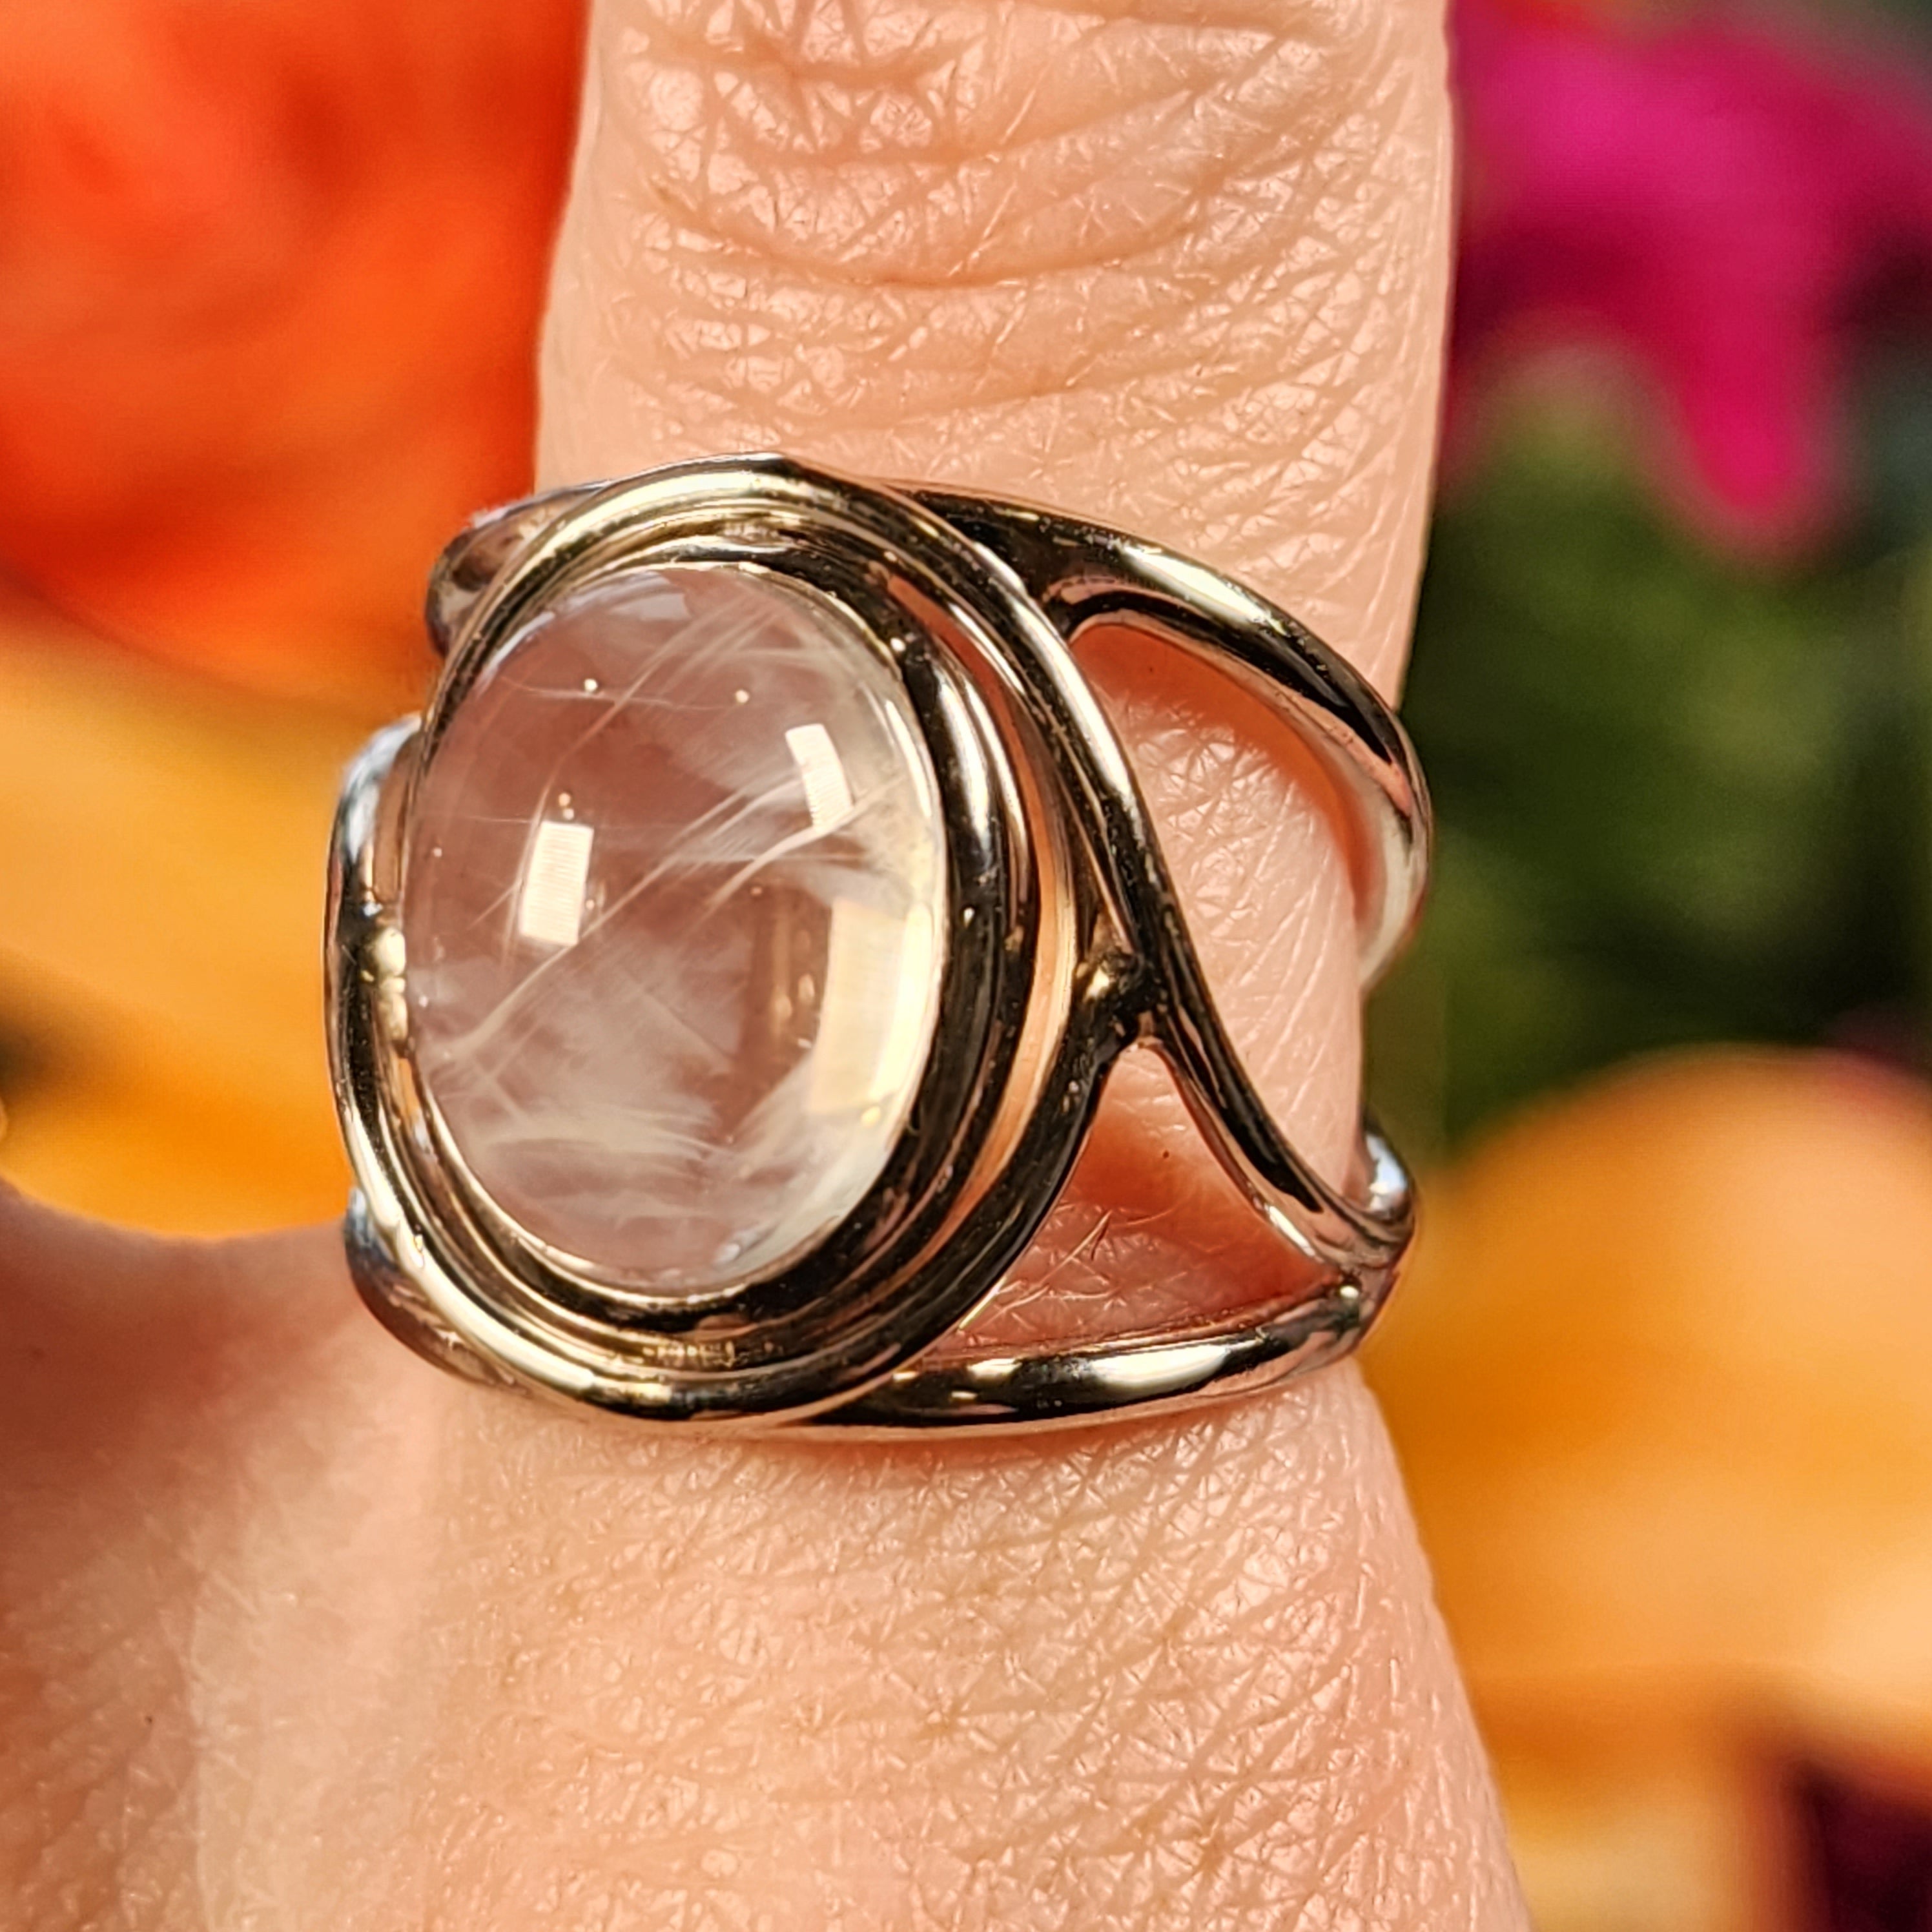 Blue Smoke Lemurian Quartz Finger Cuff Adjustable Ring .925 Silver for Ascension, Connection with Guides and Meditation